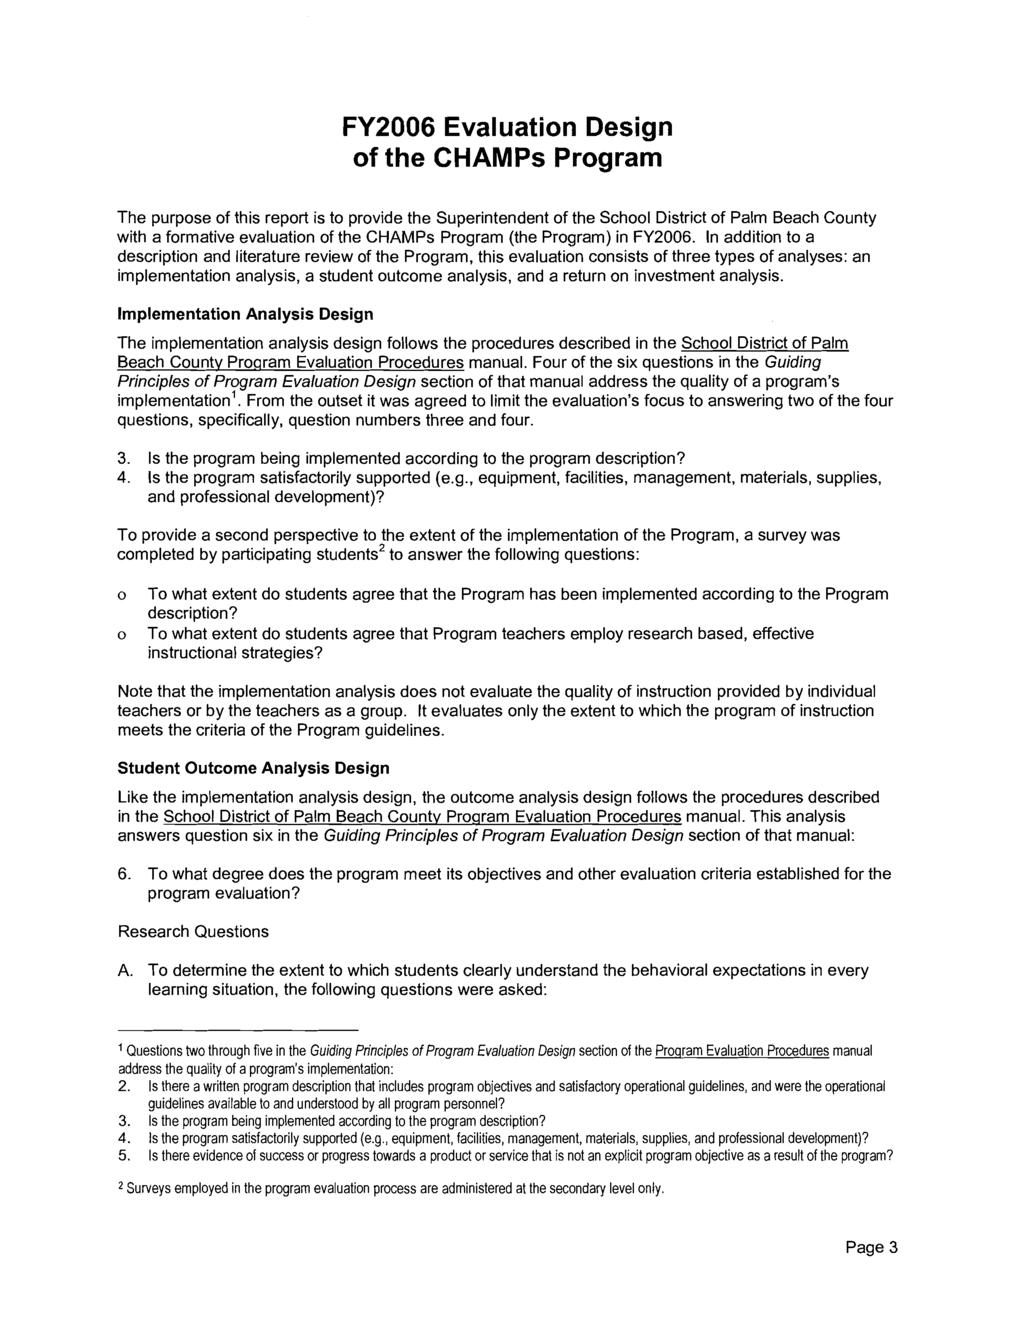 FY2006 Evaluation Design of the CHAMPs Program The purpose of this report is to provide the Superintendent of the School District of Palm Beach County with a formative evaluation of the CHAMPs